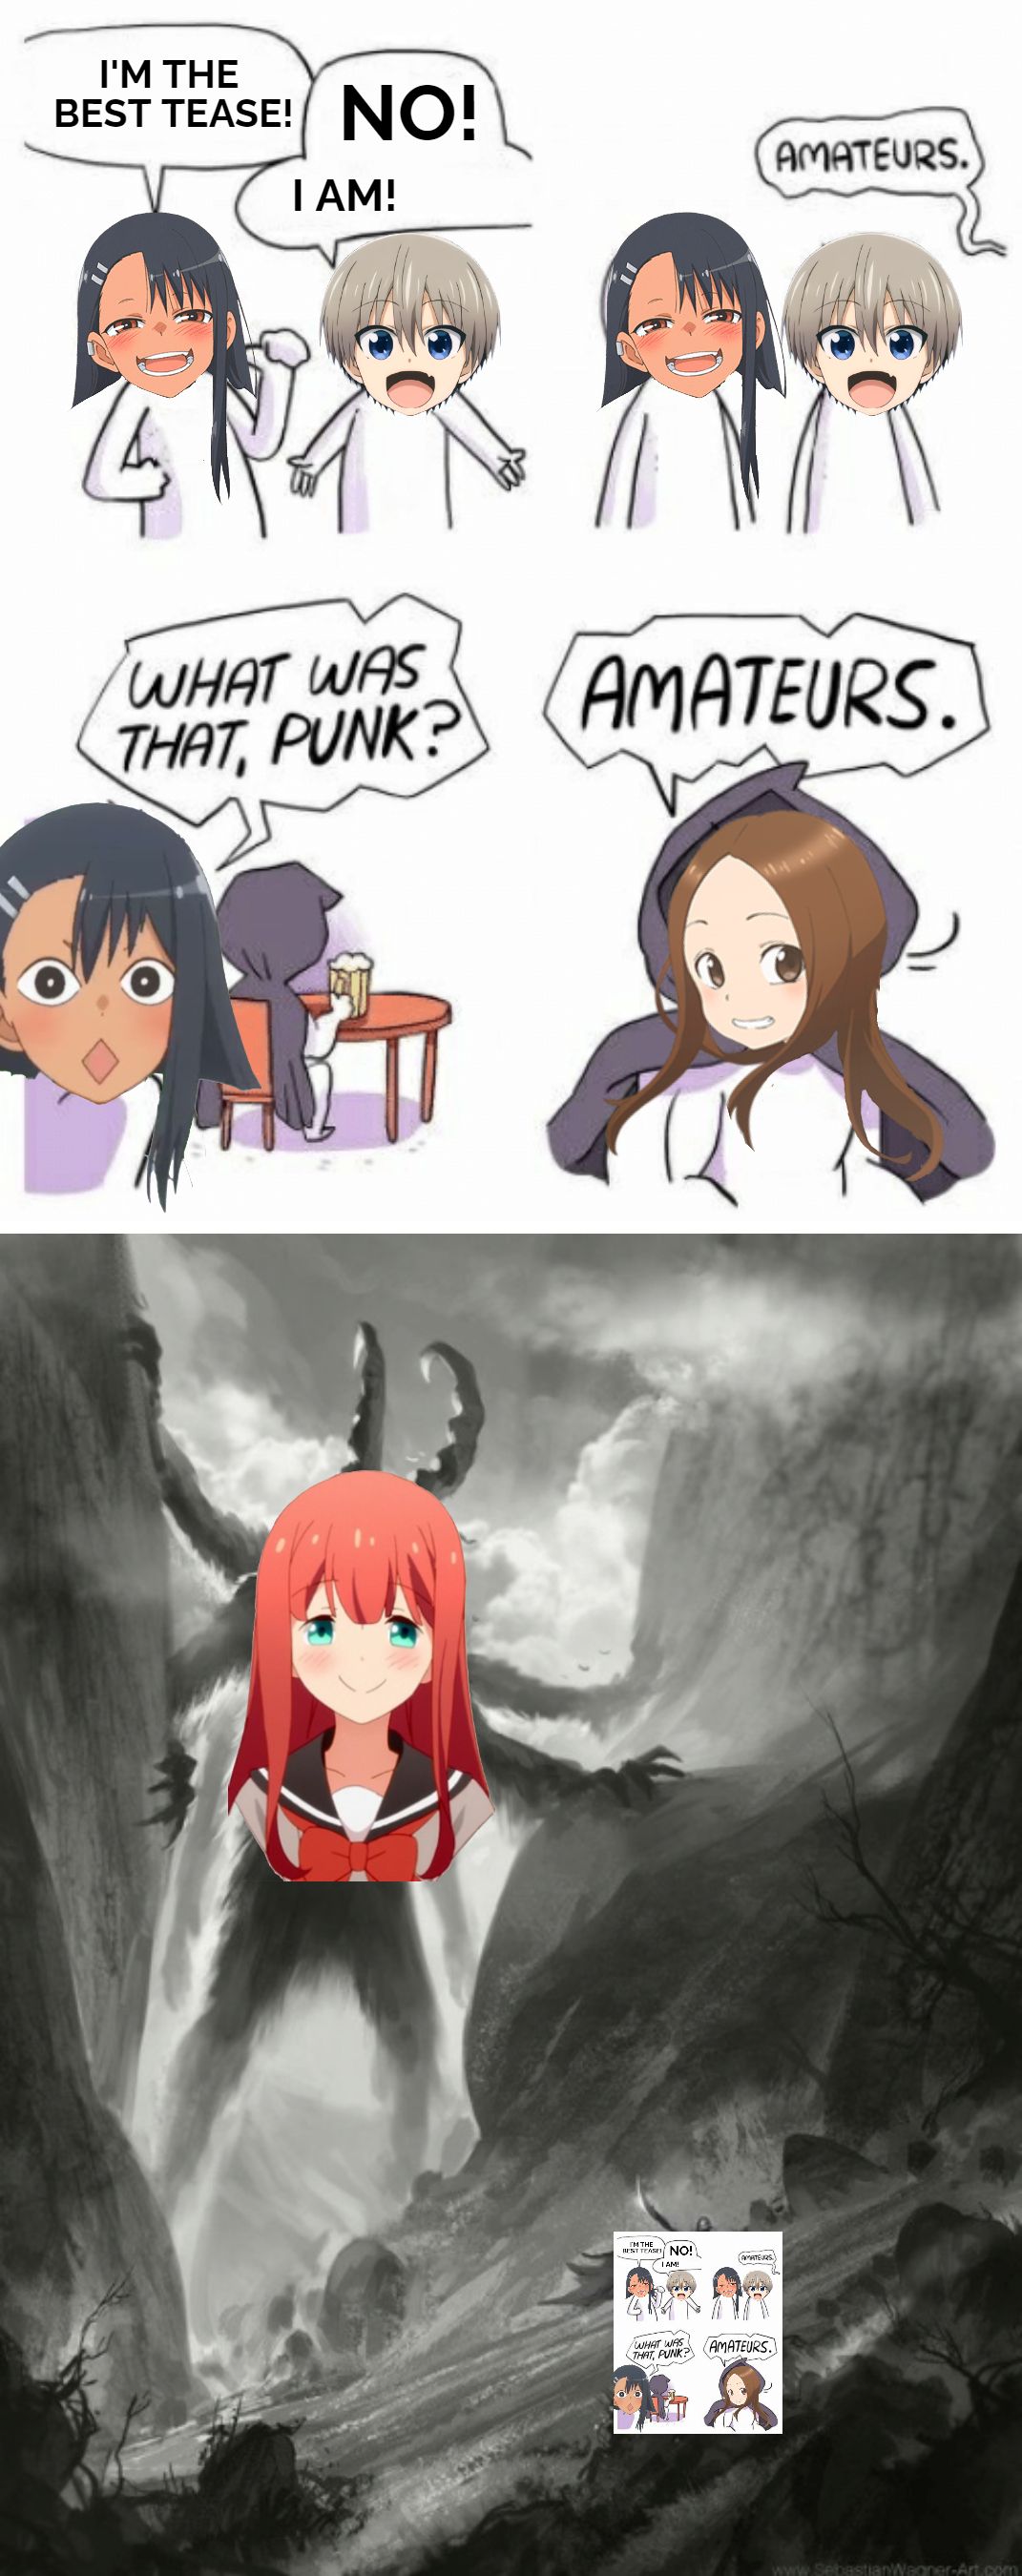 Any Tsurezure fans out here?